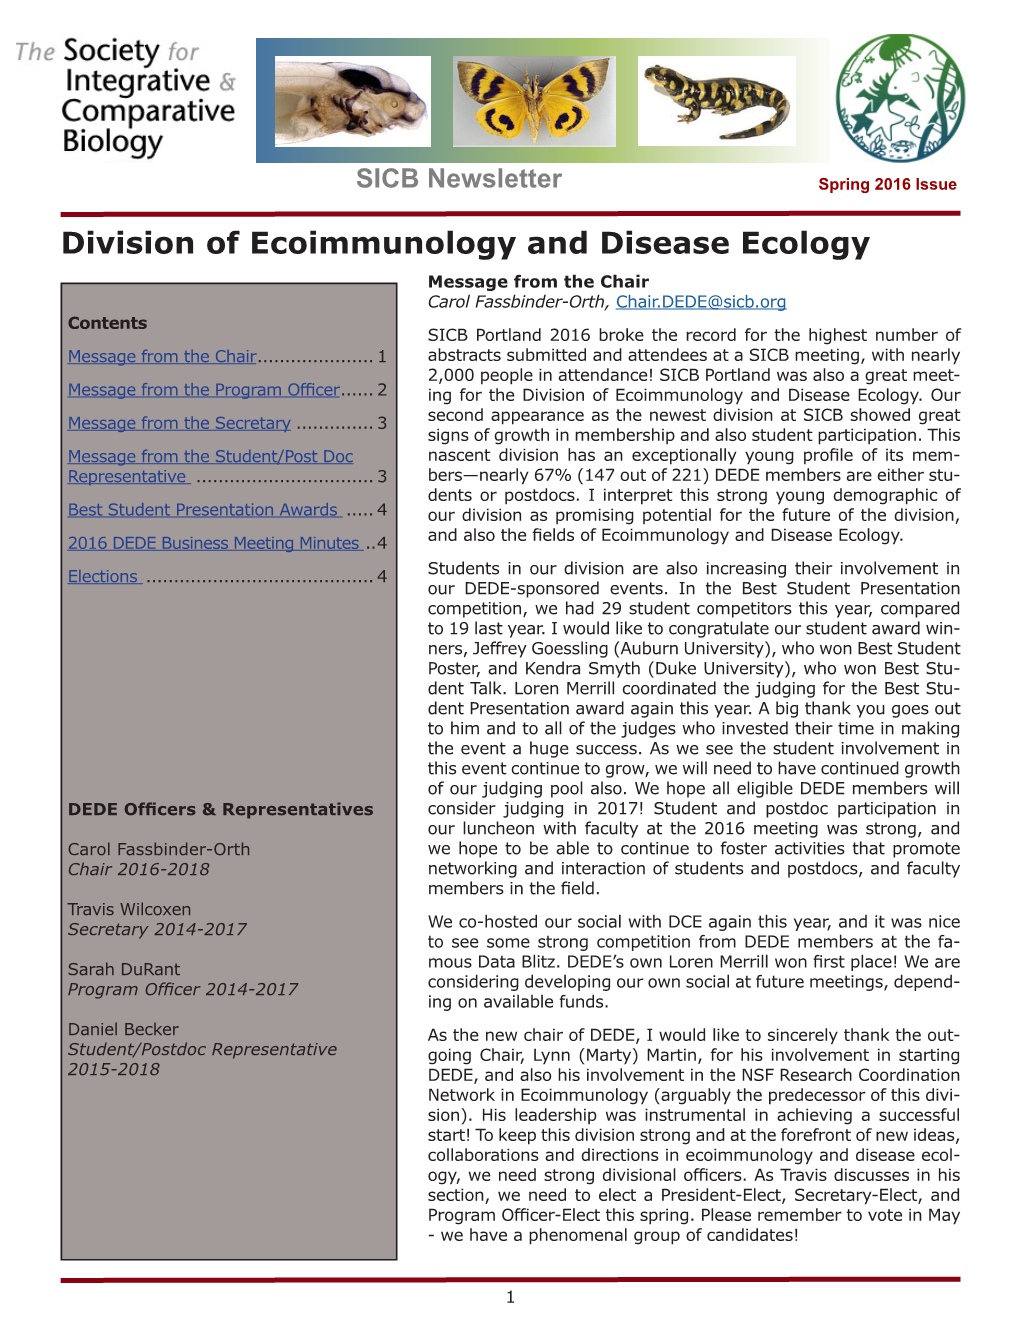 Division of Ecoimmunology and Disease Ecology